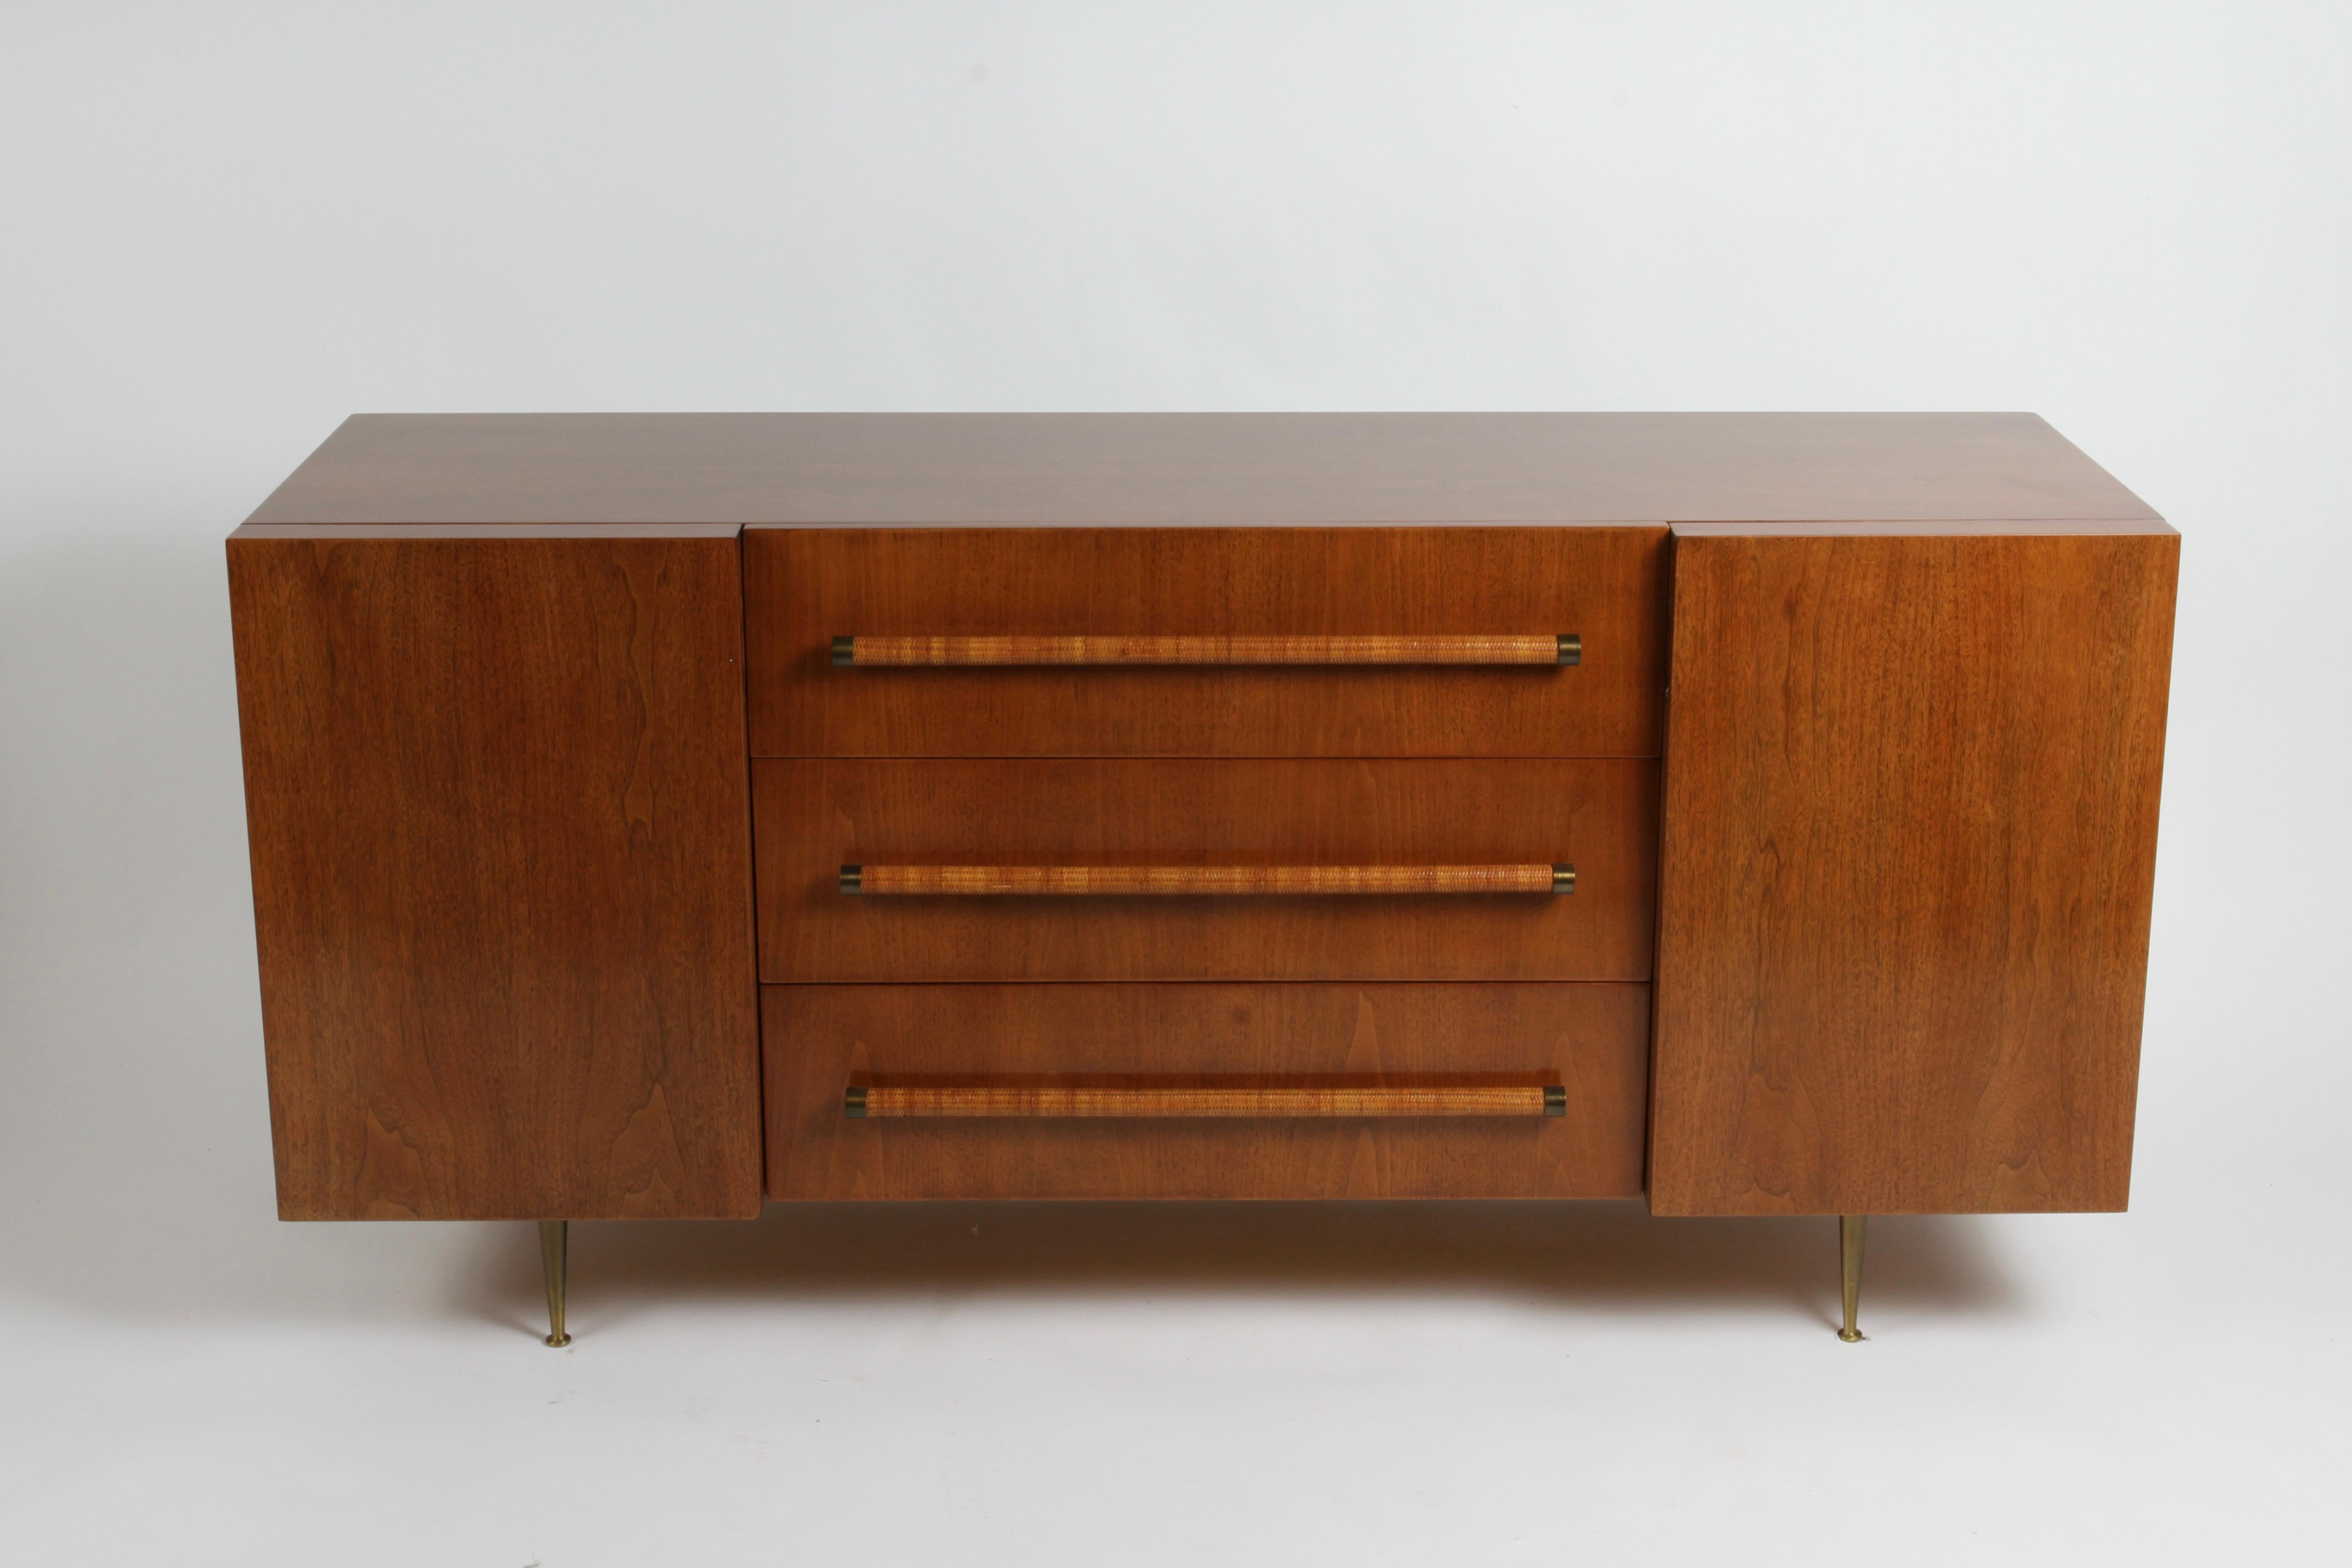 Rarely seen elegant T.H. Robsjohn-Gibbings for Widdicomb sideboard or dresser. Completely restored cabinet to original color shown. Walnut cabinet with center drawers with rattan circular handles with brass end caps, two end cabinets with shelves on